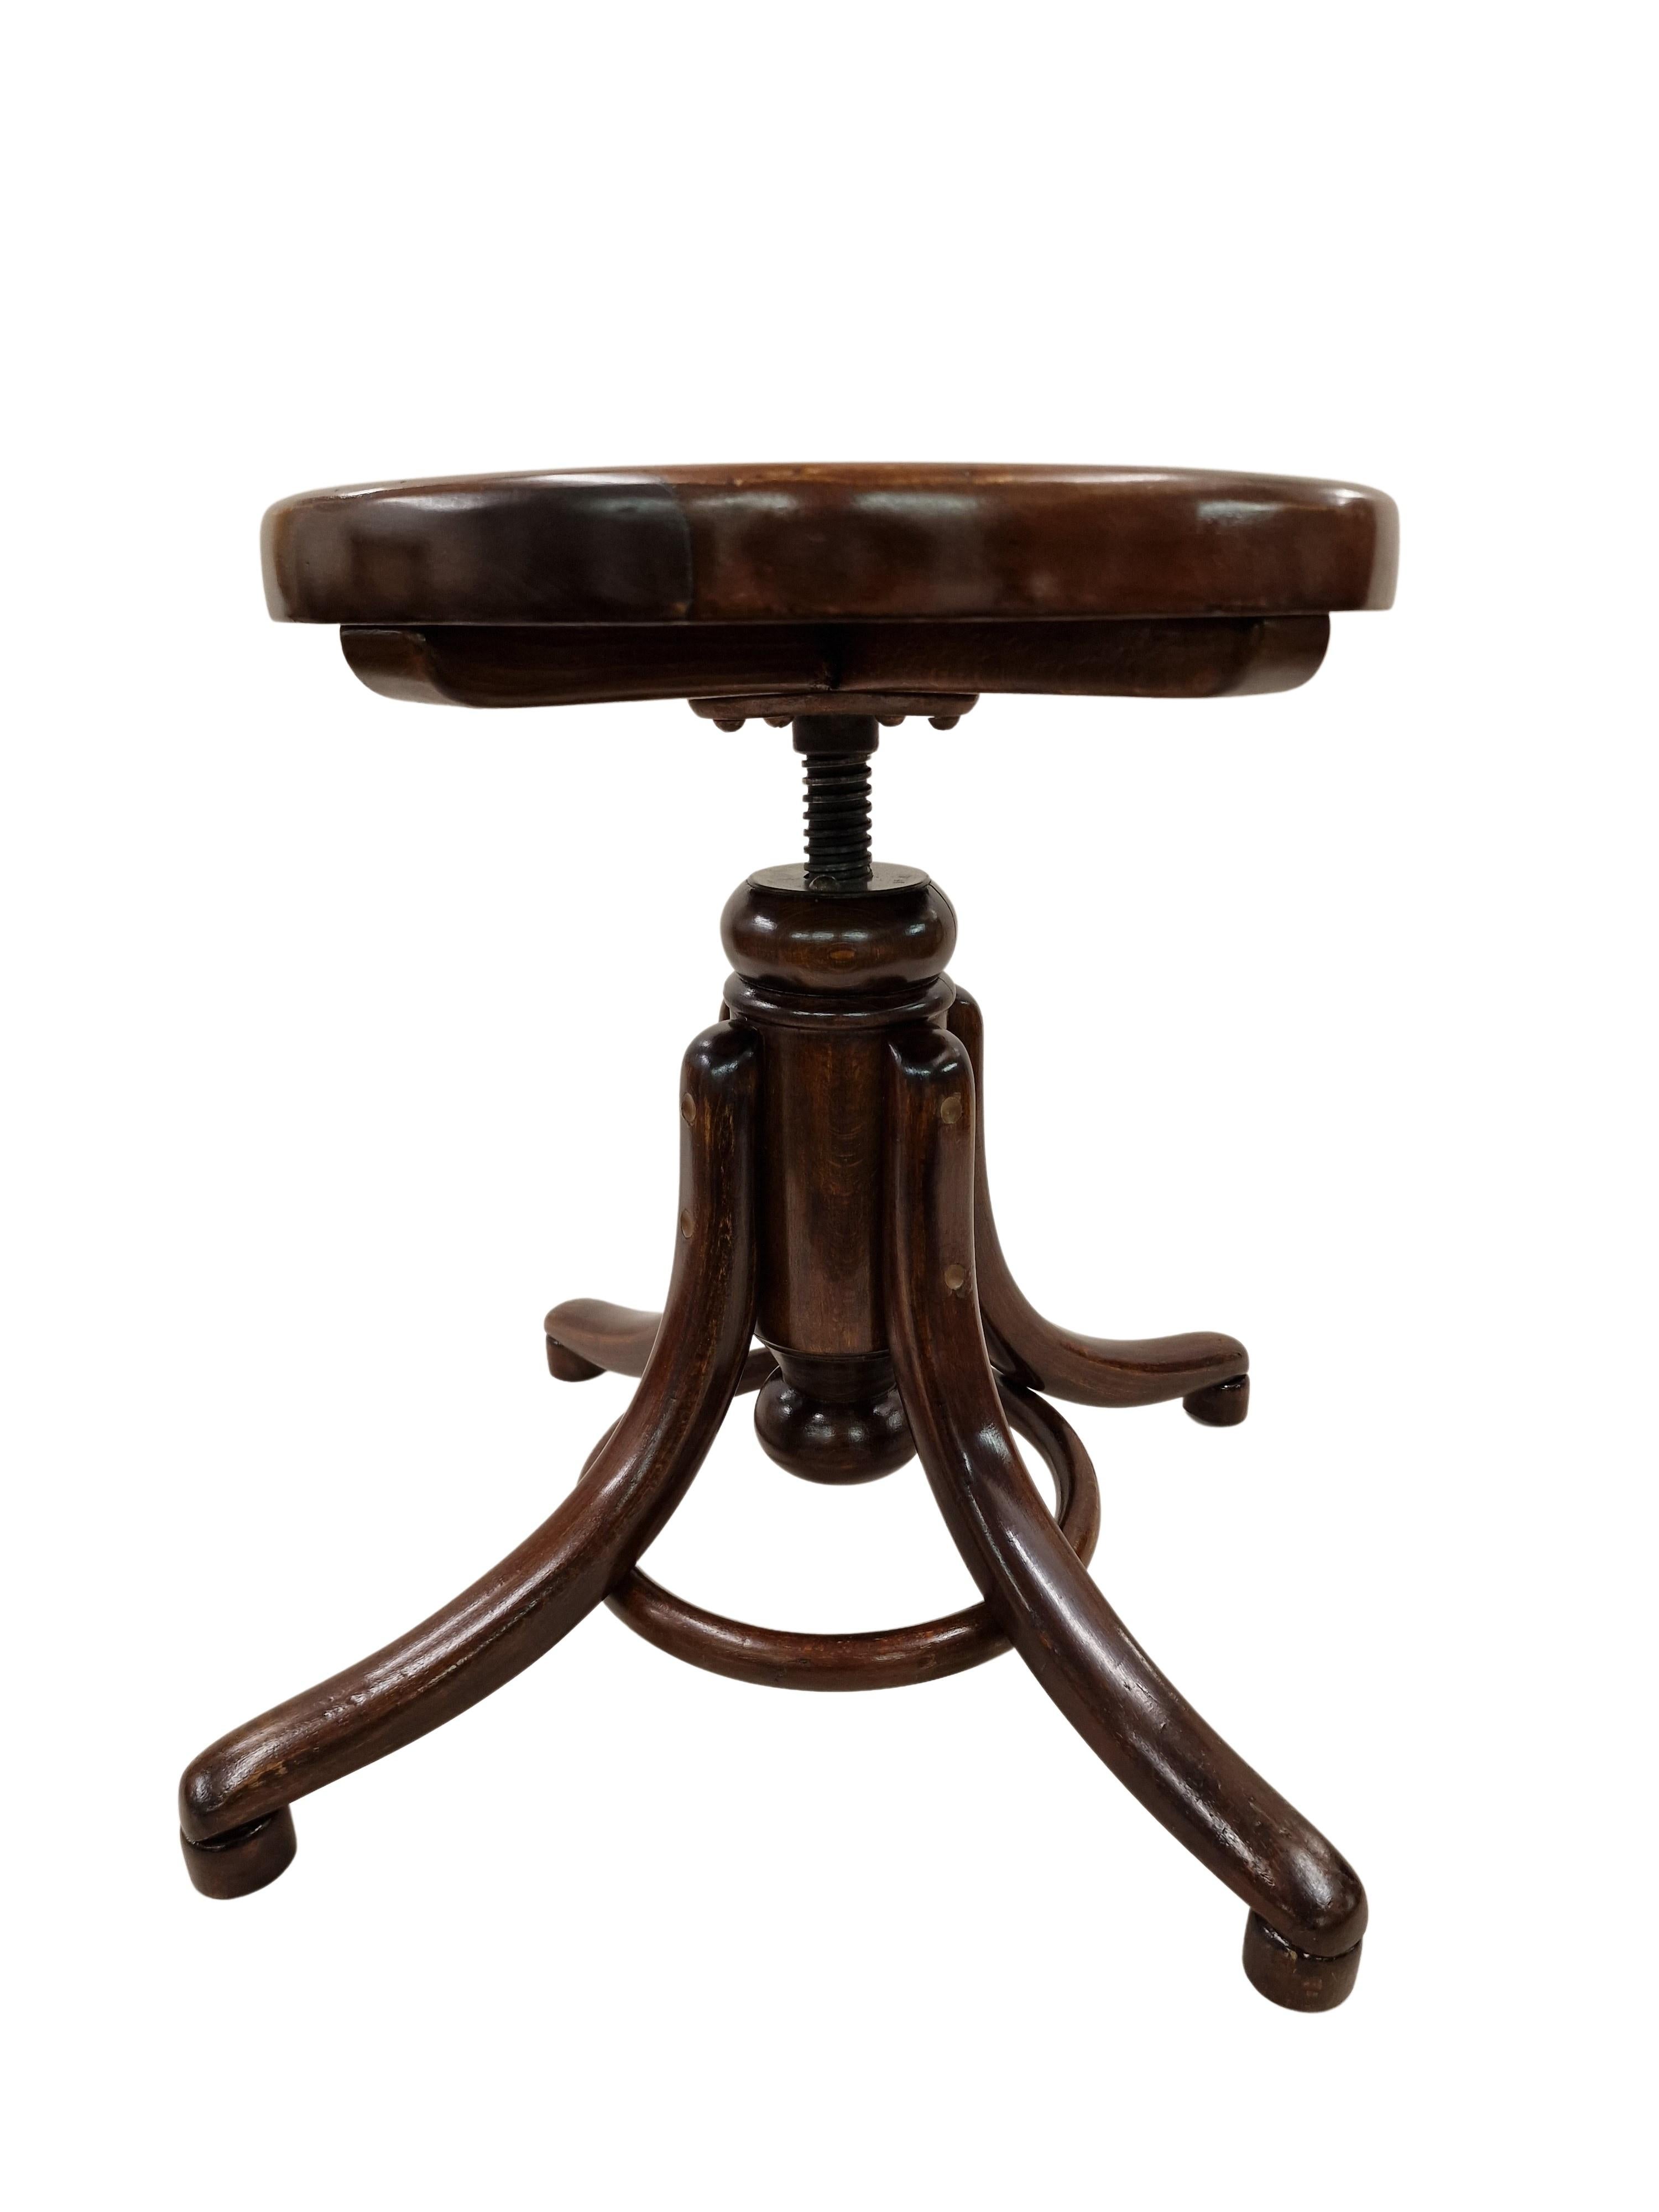 The famous piano stool of the renowned bentwood furniture manufacturer Thonet in Austria.
An original of the time from 1890 to 1900, Jugendstil, out of bentwool (beech), stained to resemble walnut.
The round seat forms a wonderful contrast to the